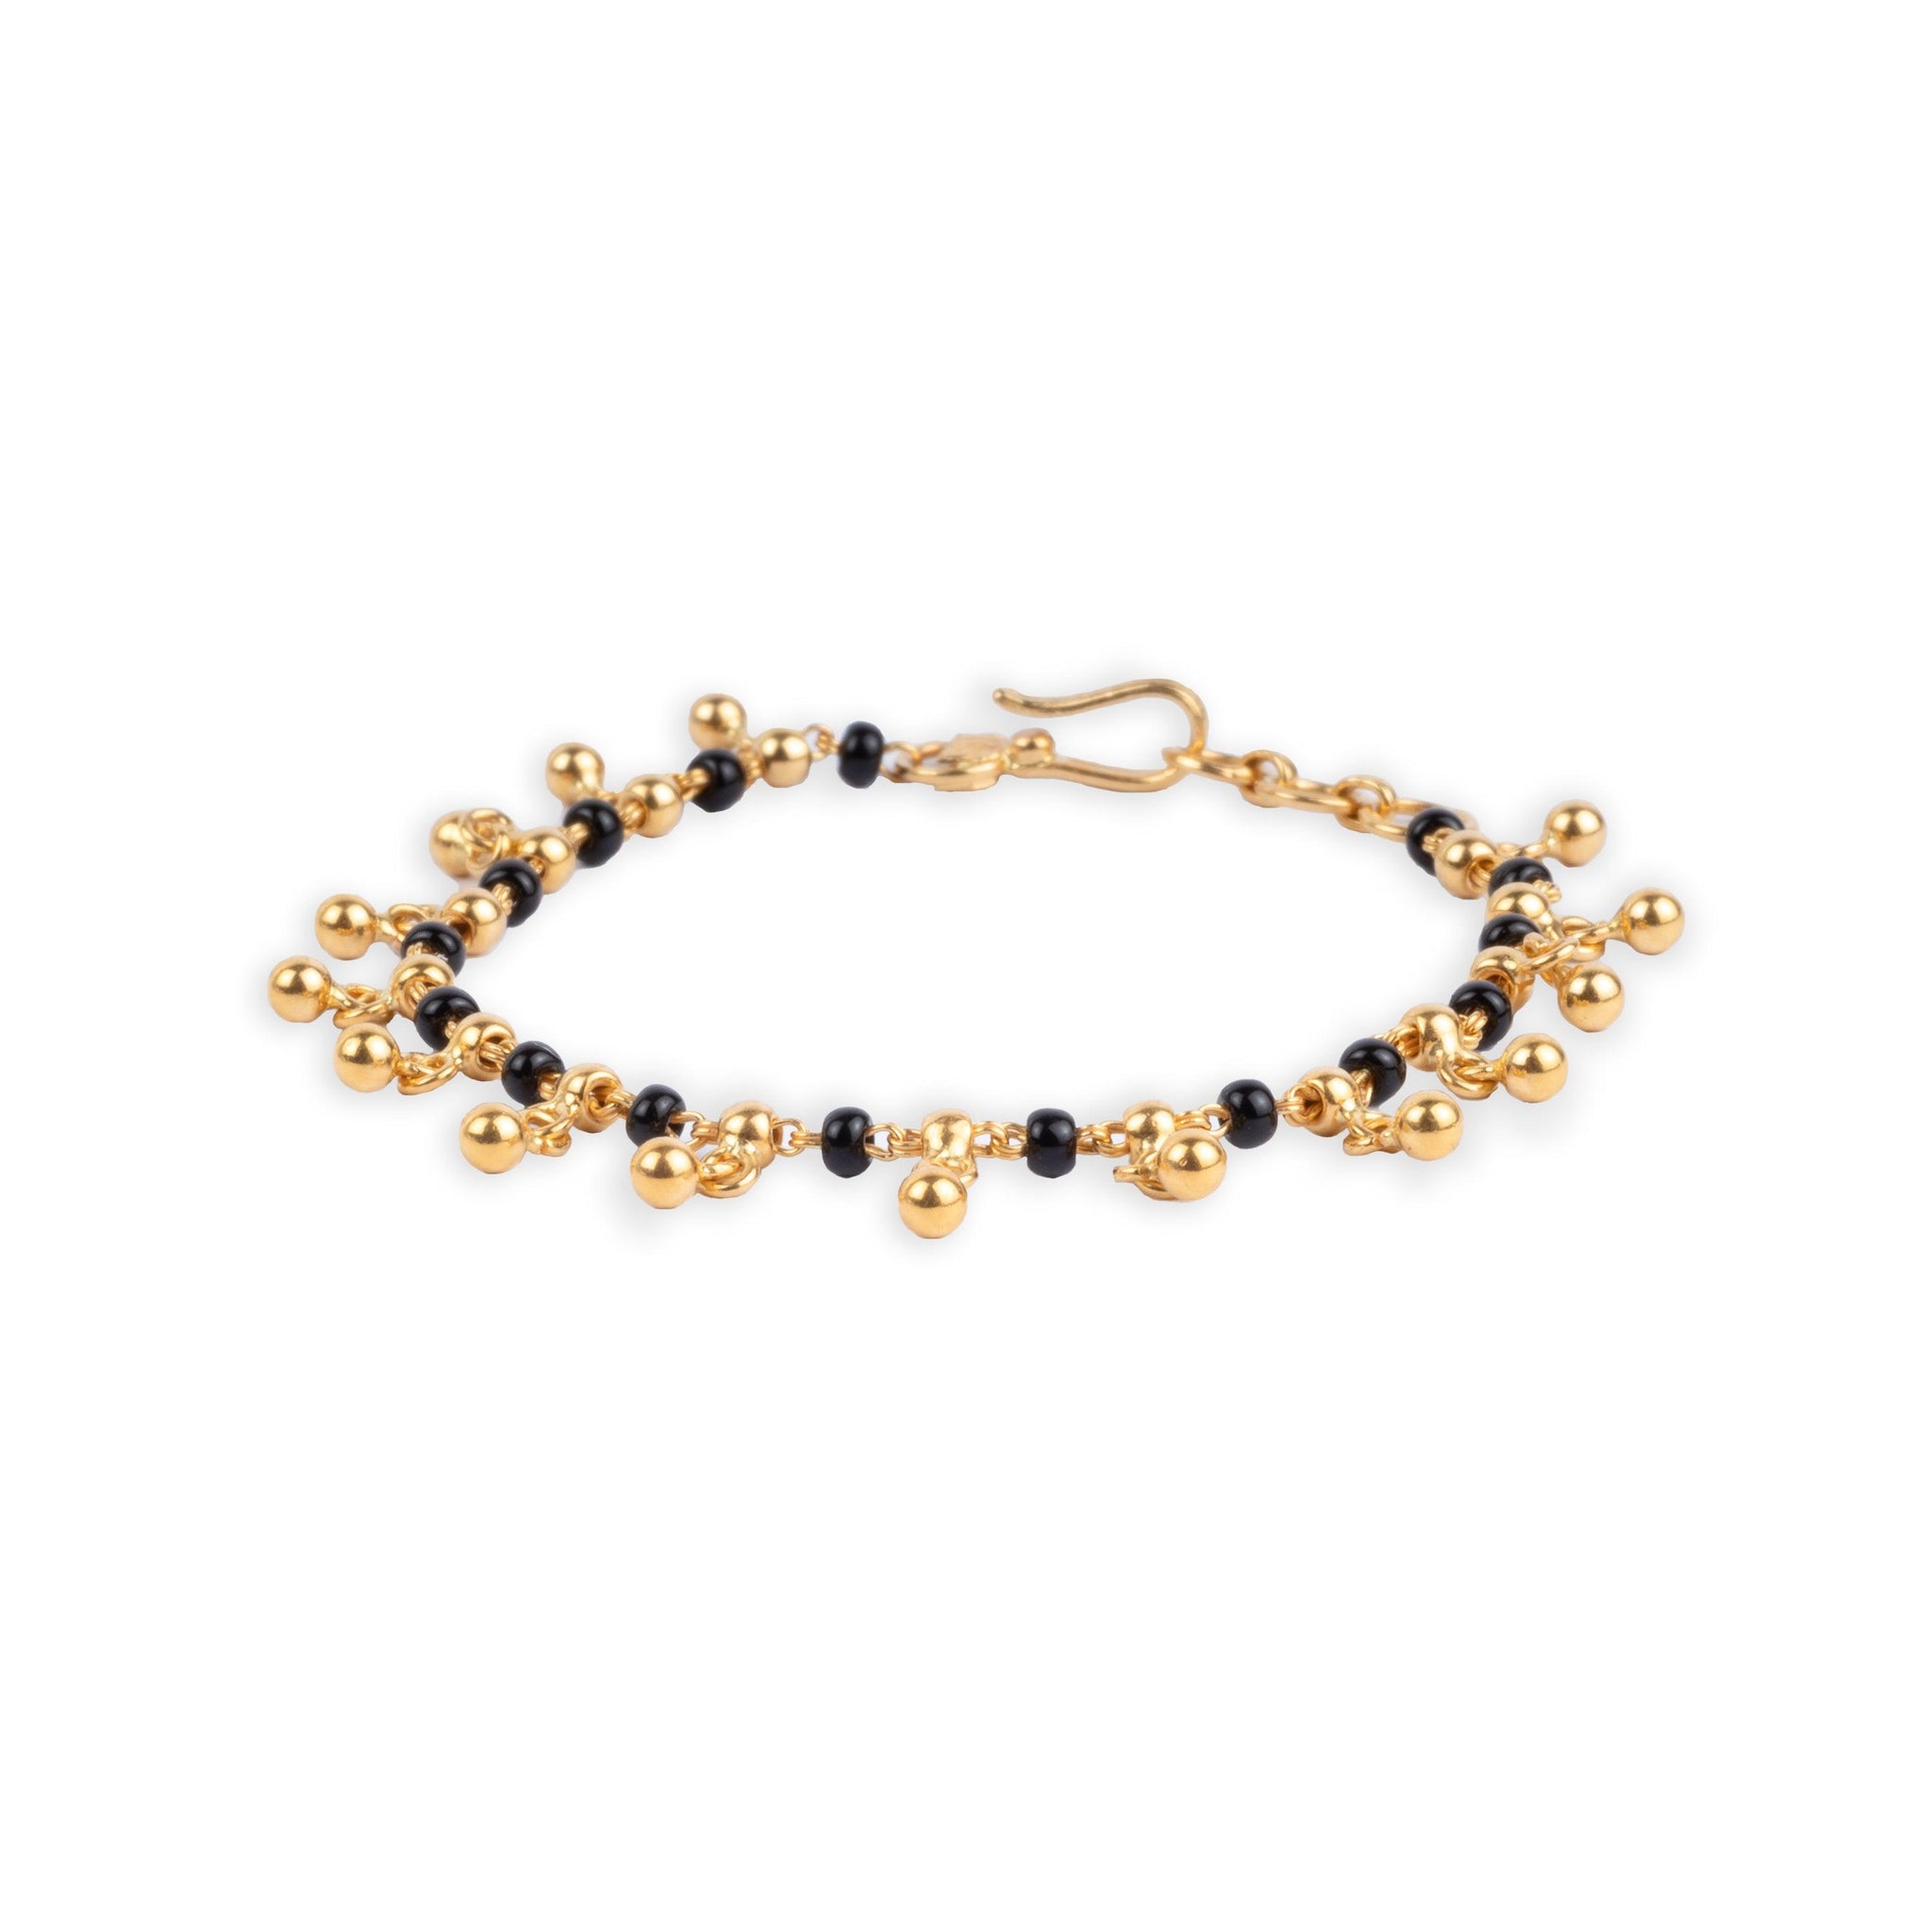 22ct Gold Black Bead and Gold Drops Children's Bracelets with Hook Clasp CBR-8269